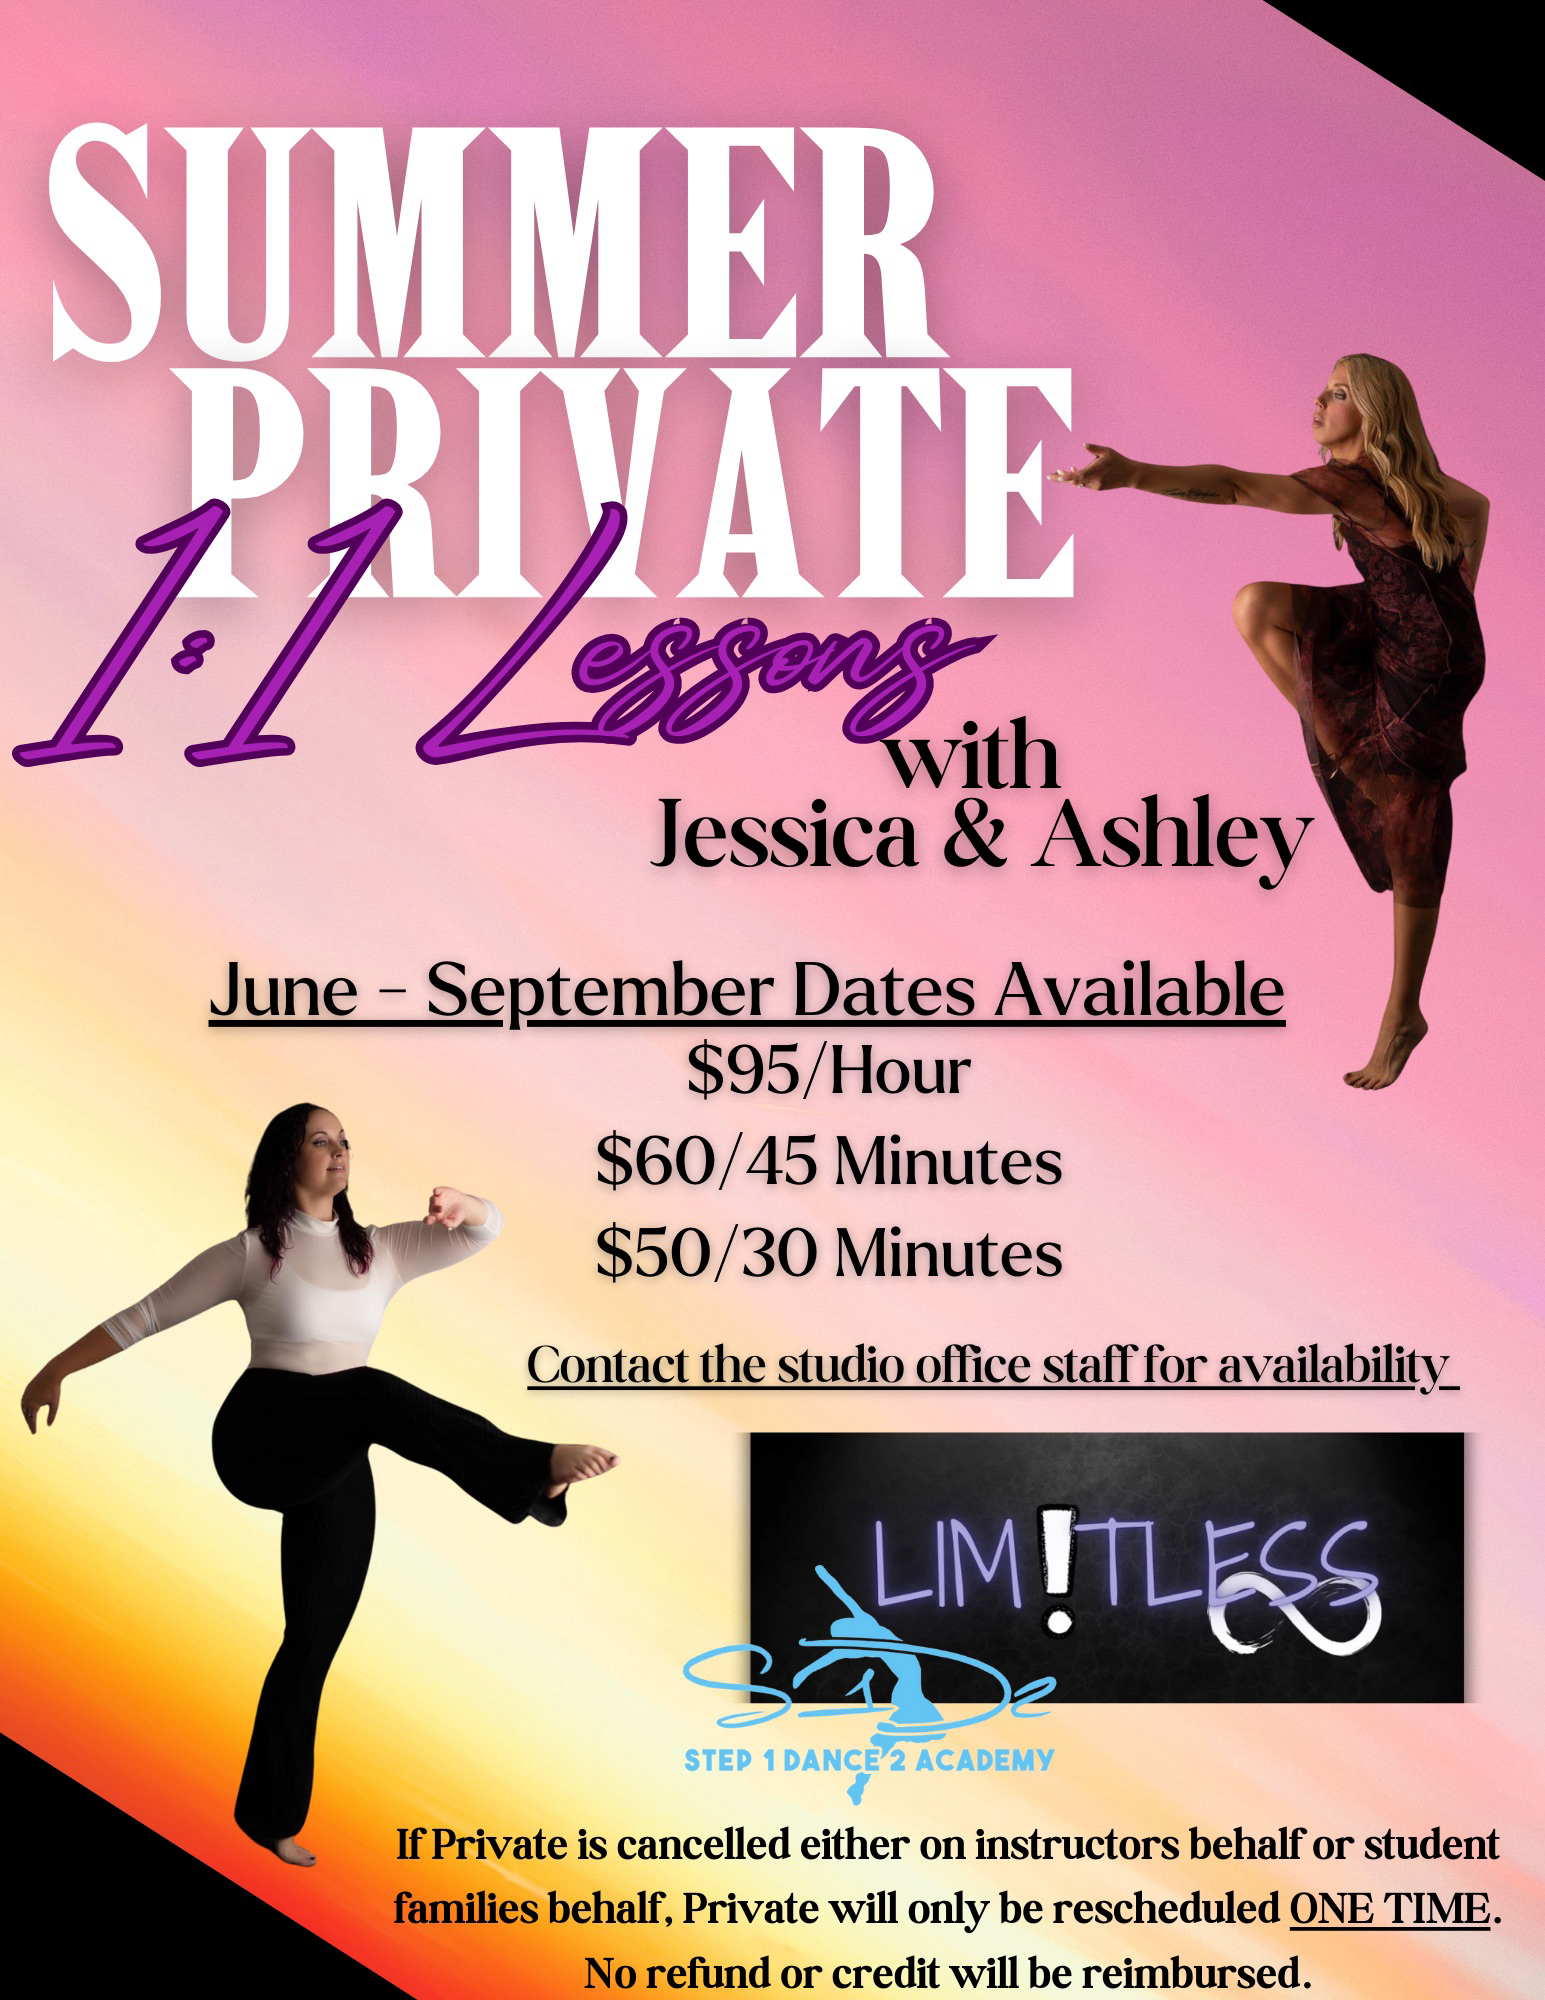 Summer 1:1 Privates with Jessica & Ashley